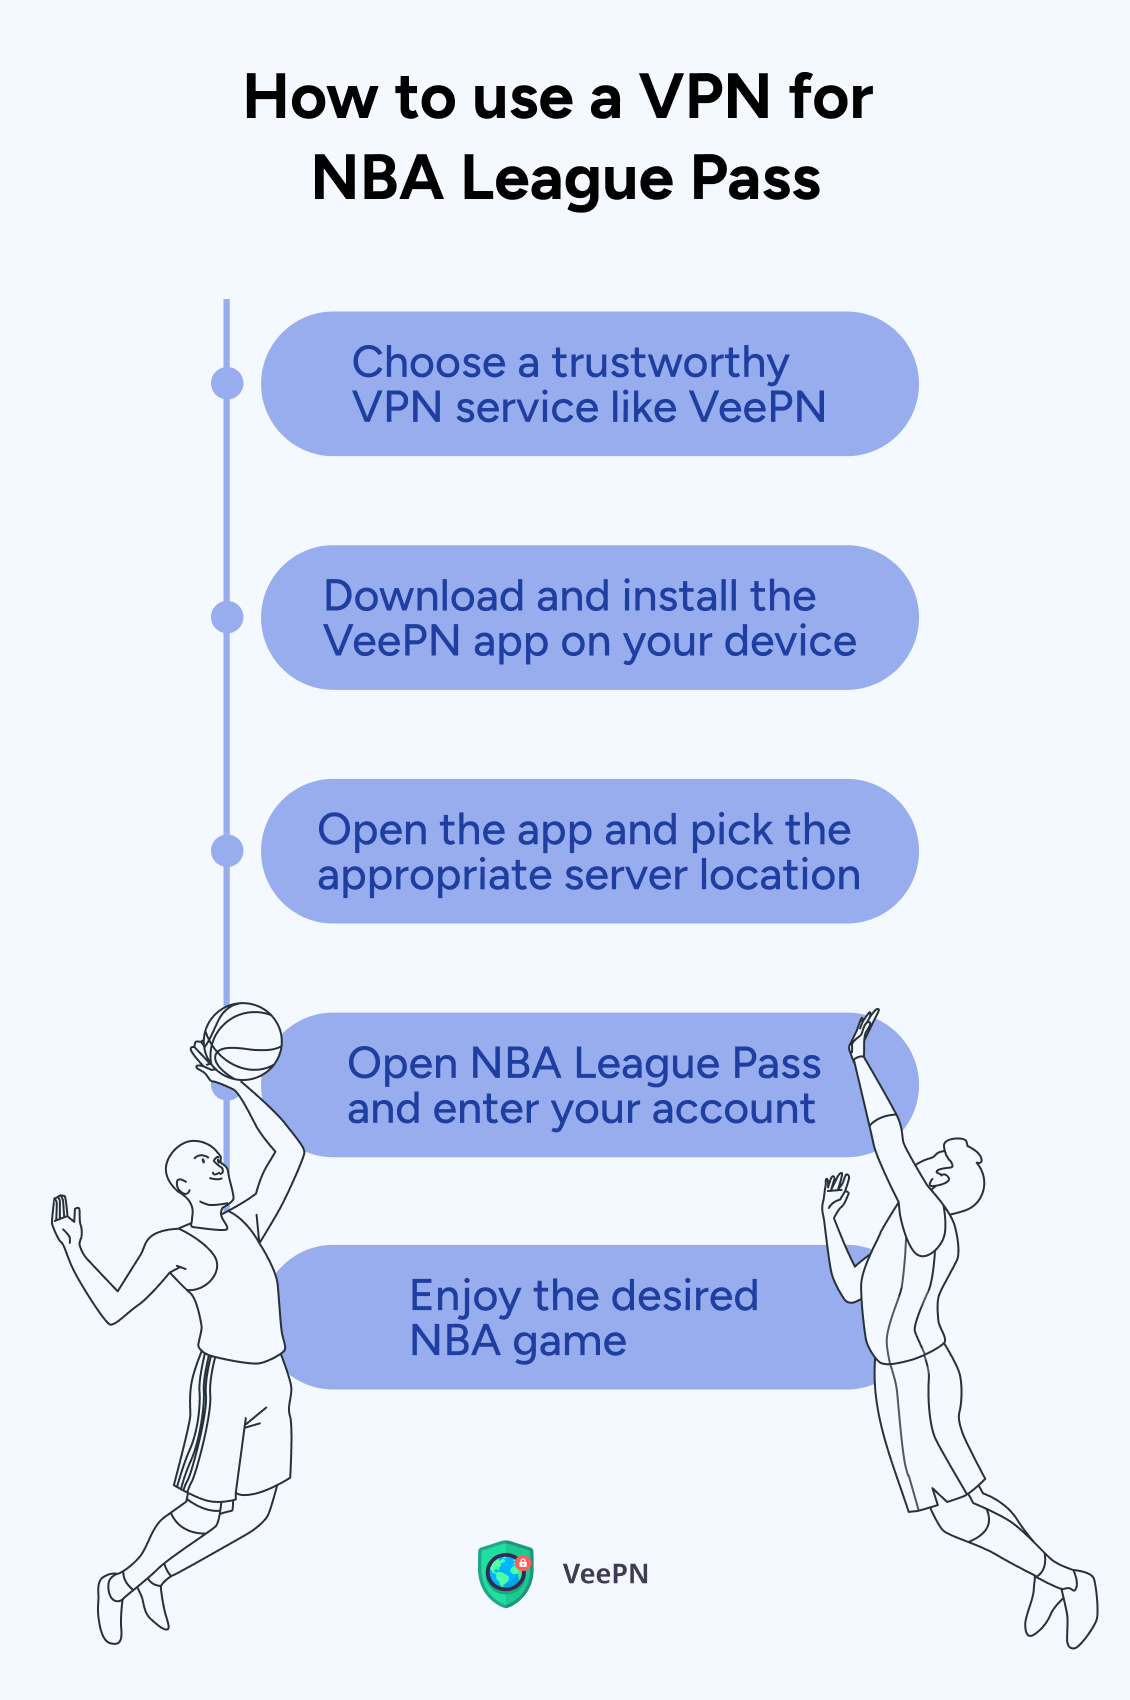 How to use a VPN for NBA League Pass